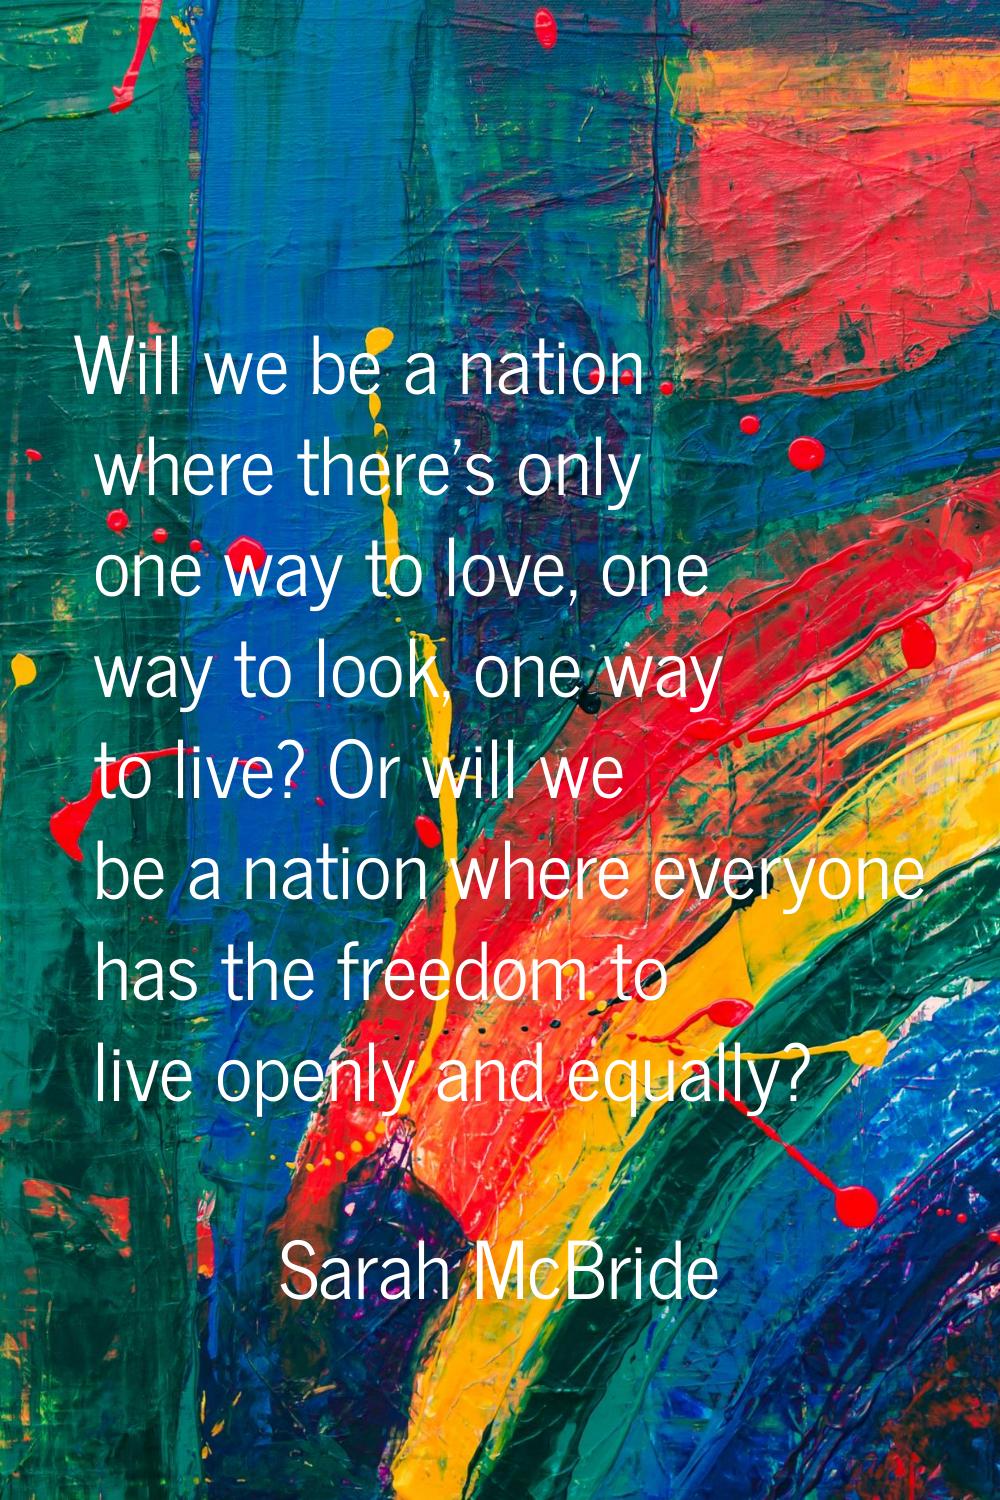 Will we be a nation where there's only one way to love, one way to look, one way to live? Or will w